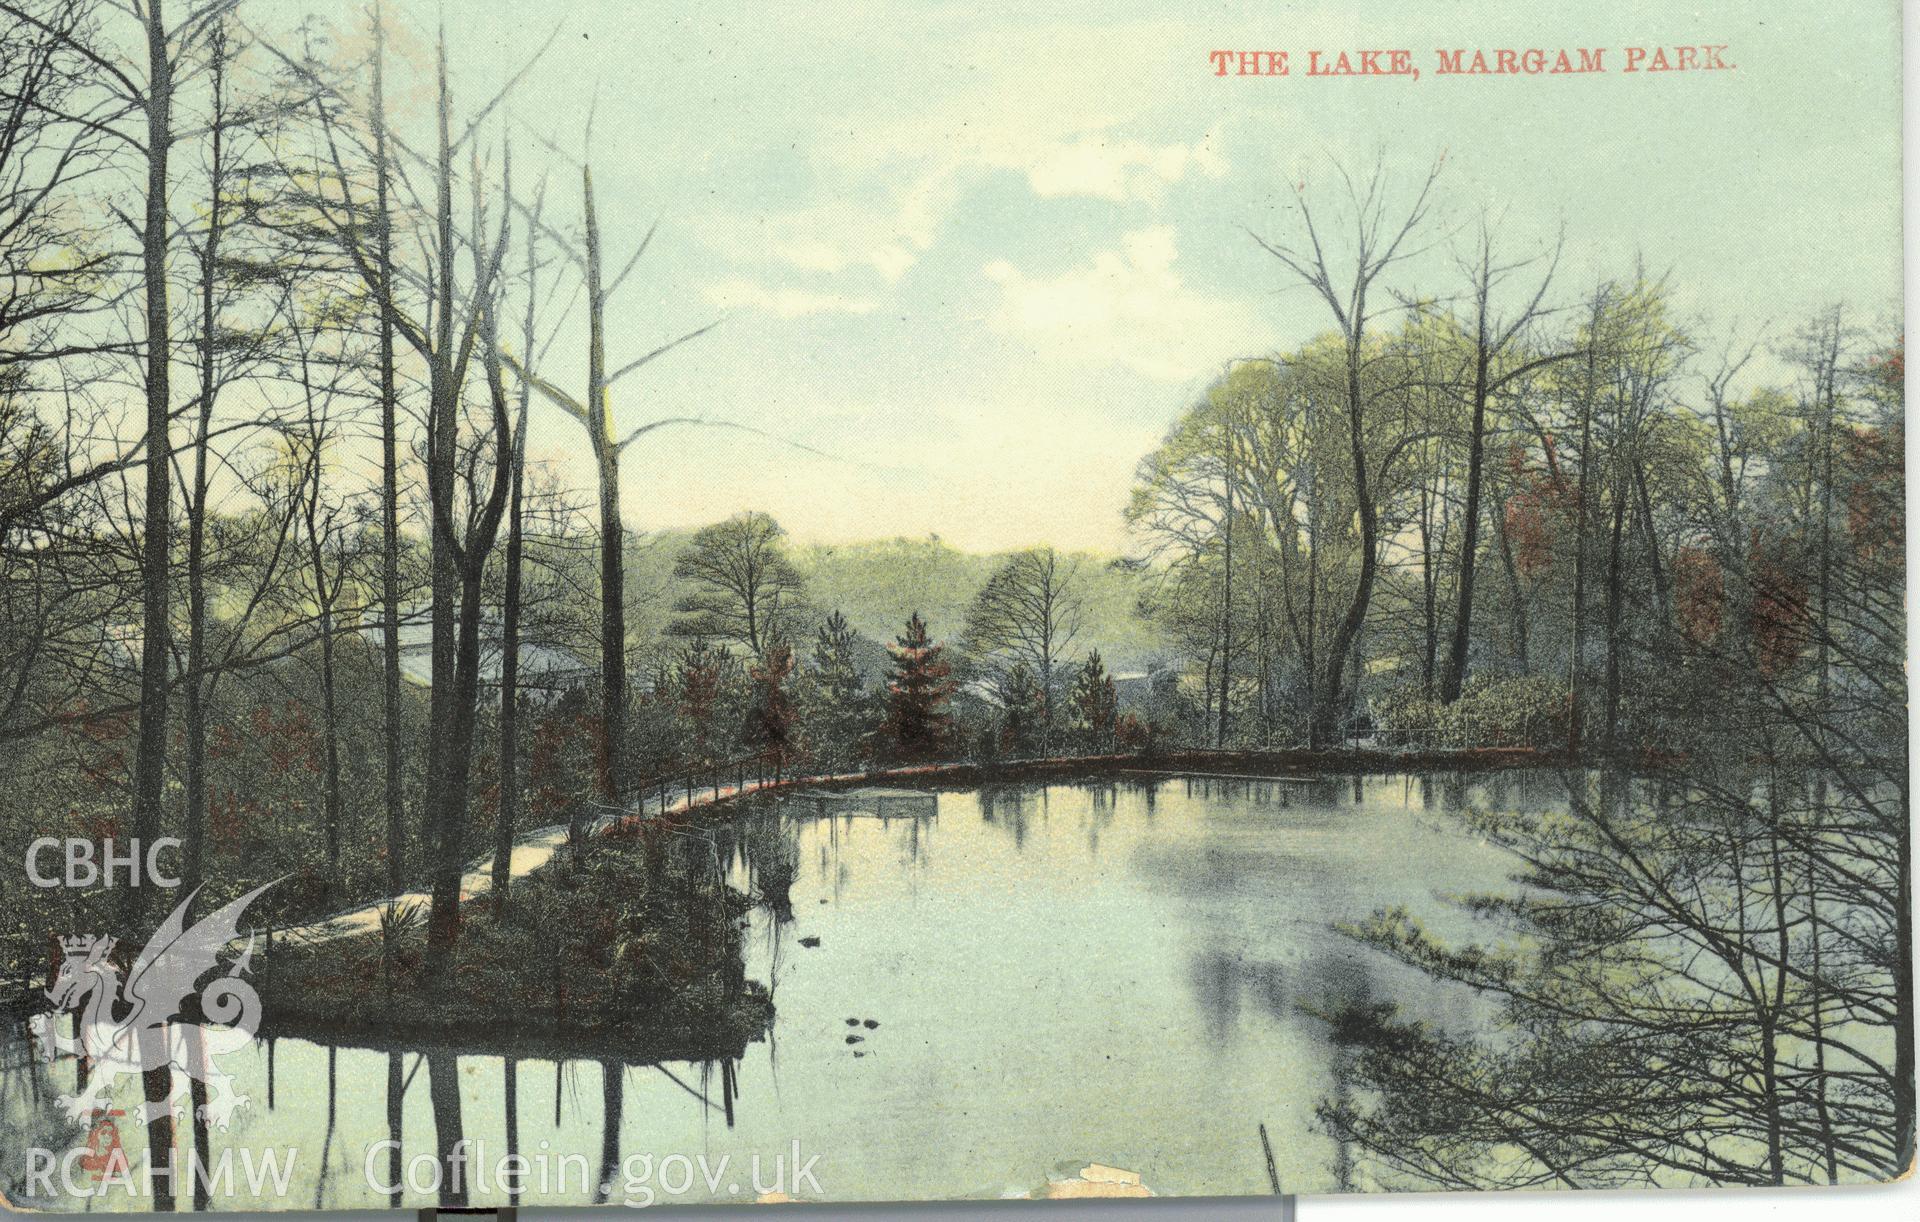 Digitised postcard image of the lake, Margam park gardens, the Milton Glazette series, Woolstone Bros, London. Produced by Parks and Gardens Data Services, from an original item in the Peter Davis Collection at Parks and Gardens UK. We hold only web-resolution images of this collection, suitable for viewing on screen and for research purposes only. We do not hold the original images, or publication quality scans.